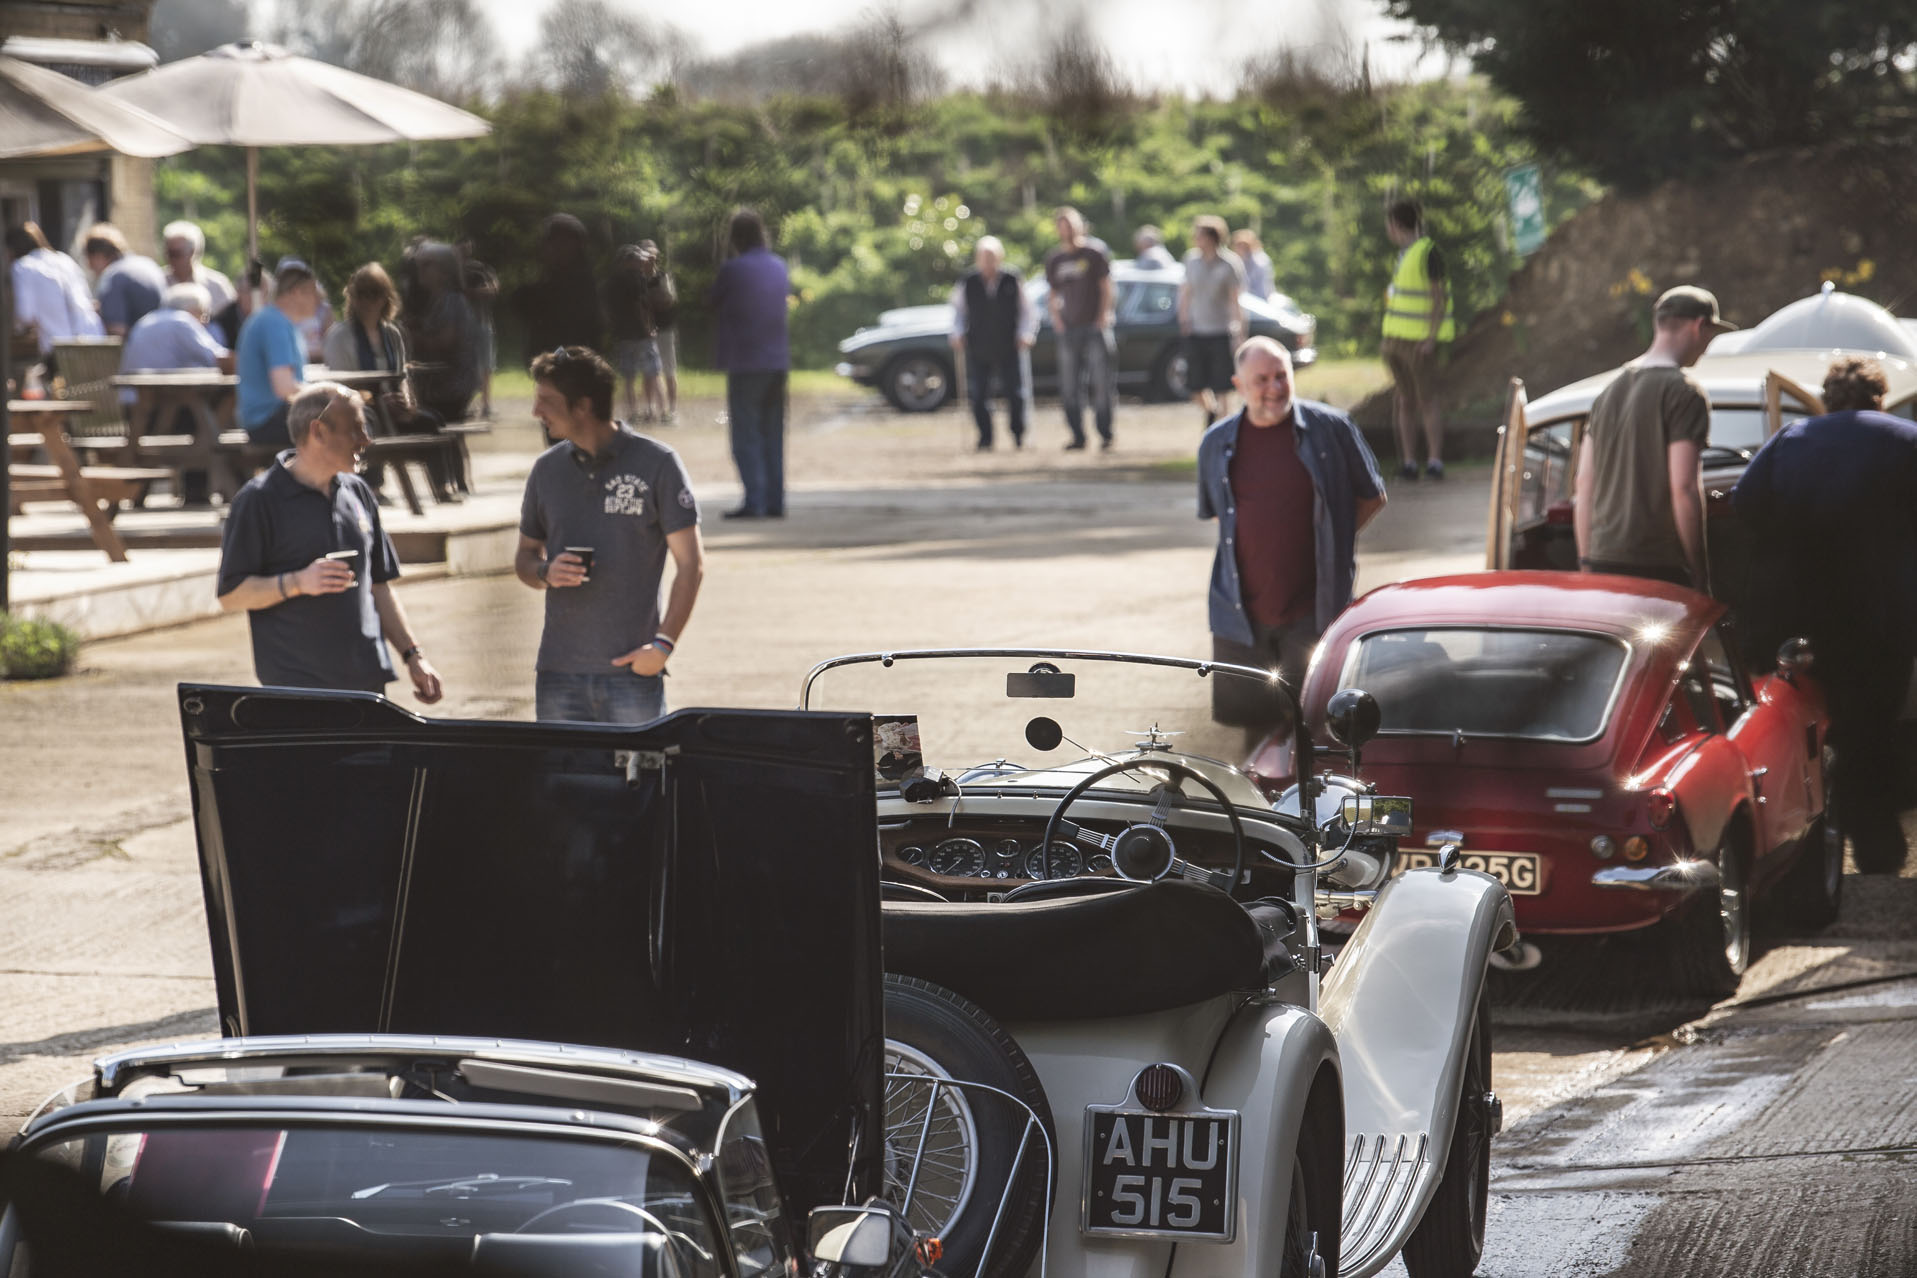 White singer and crowds at Classic Motor Hub